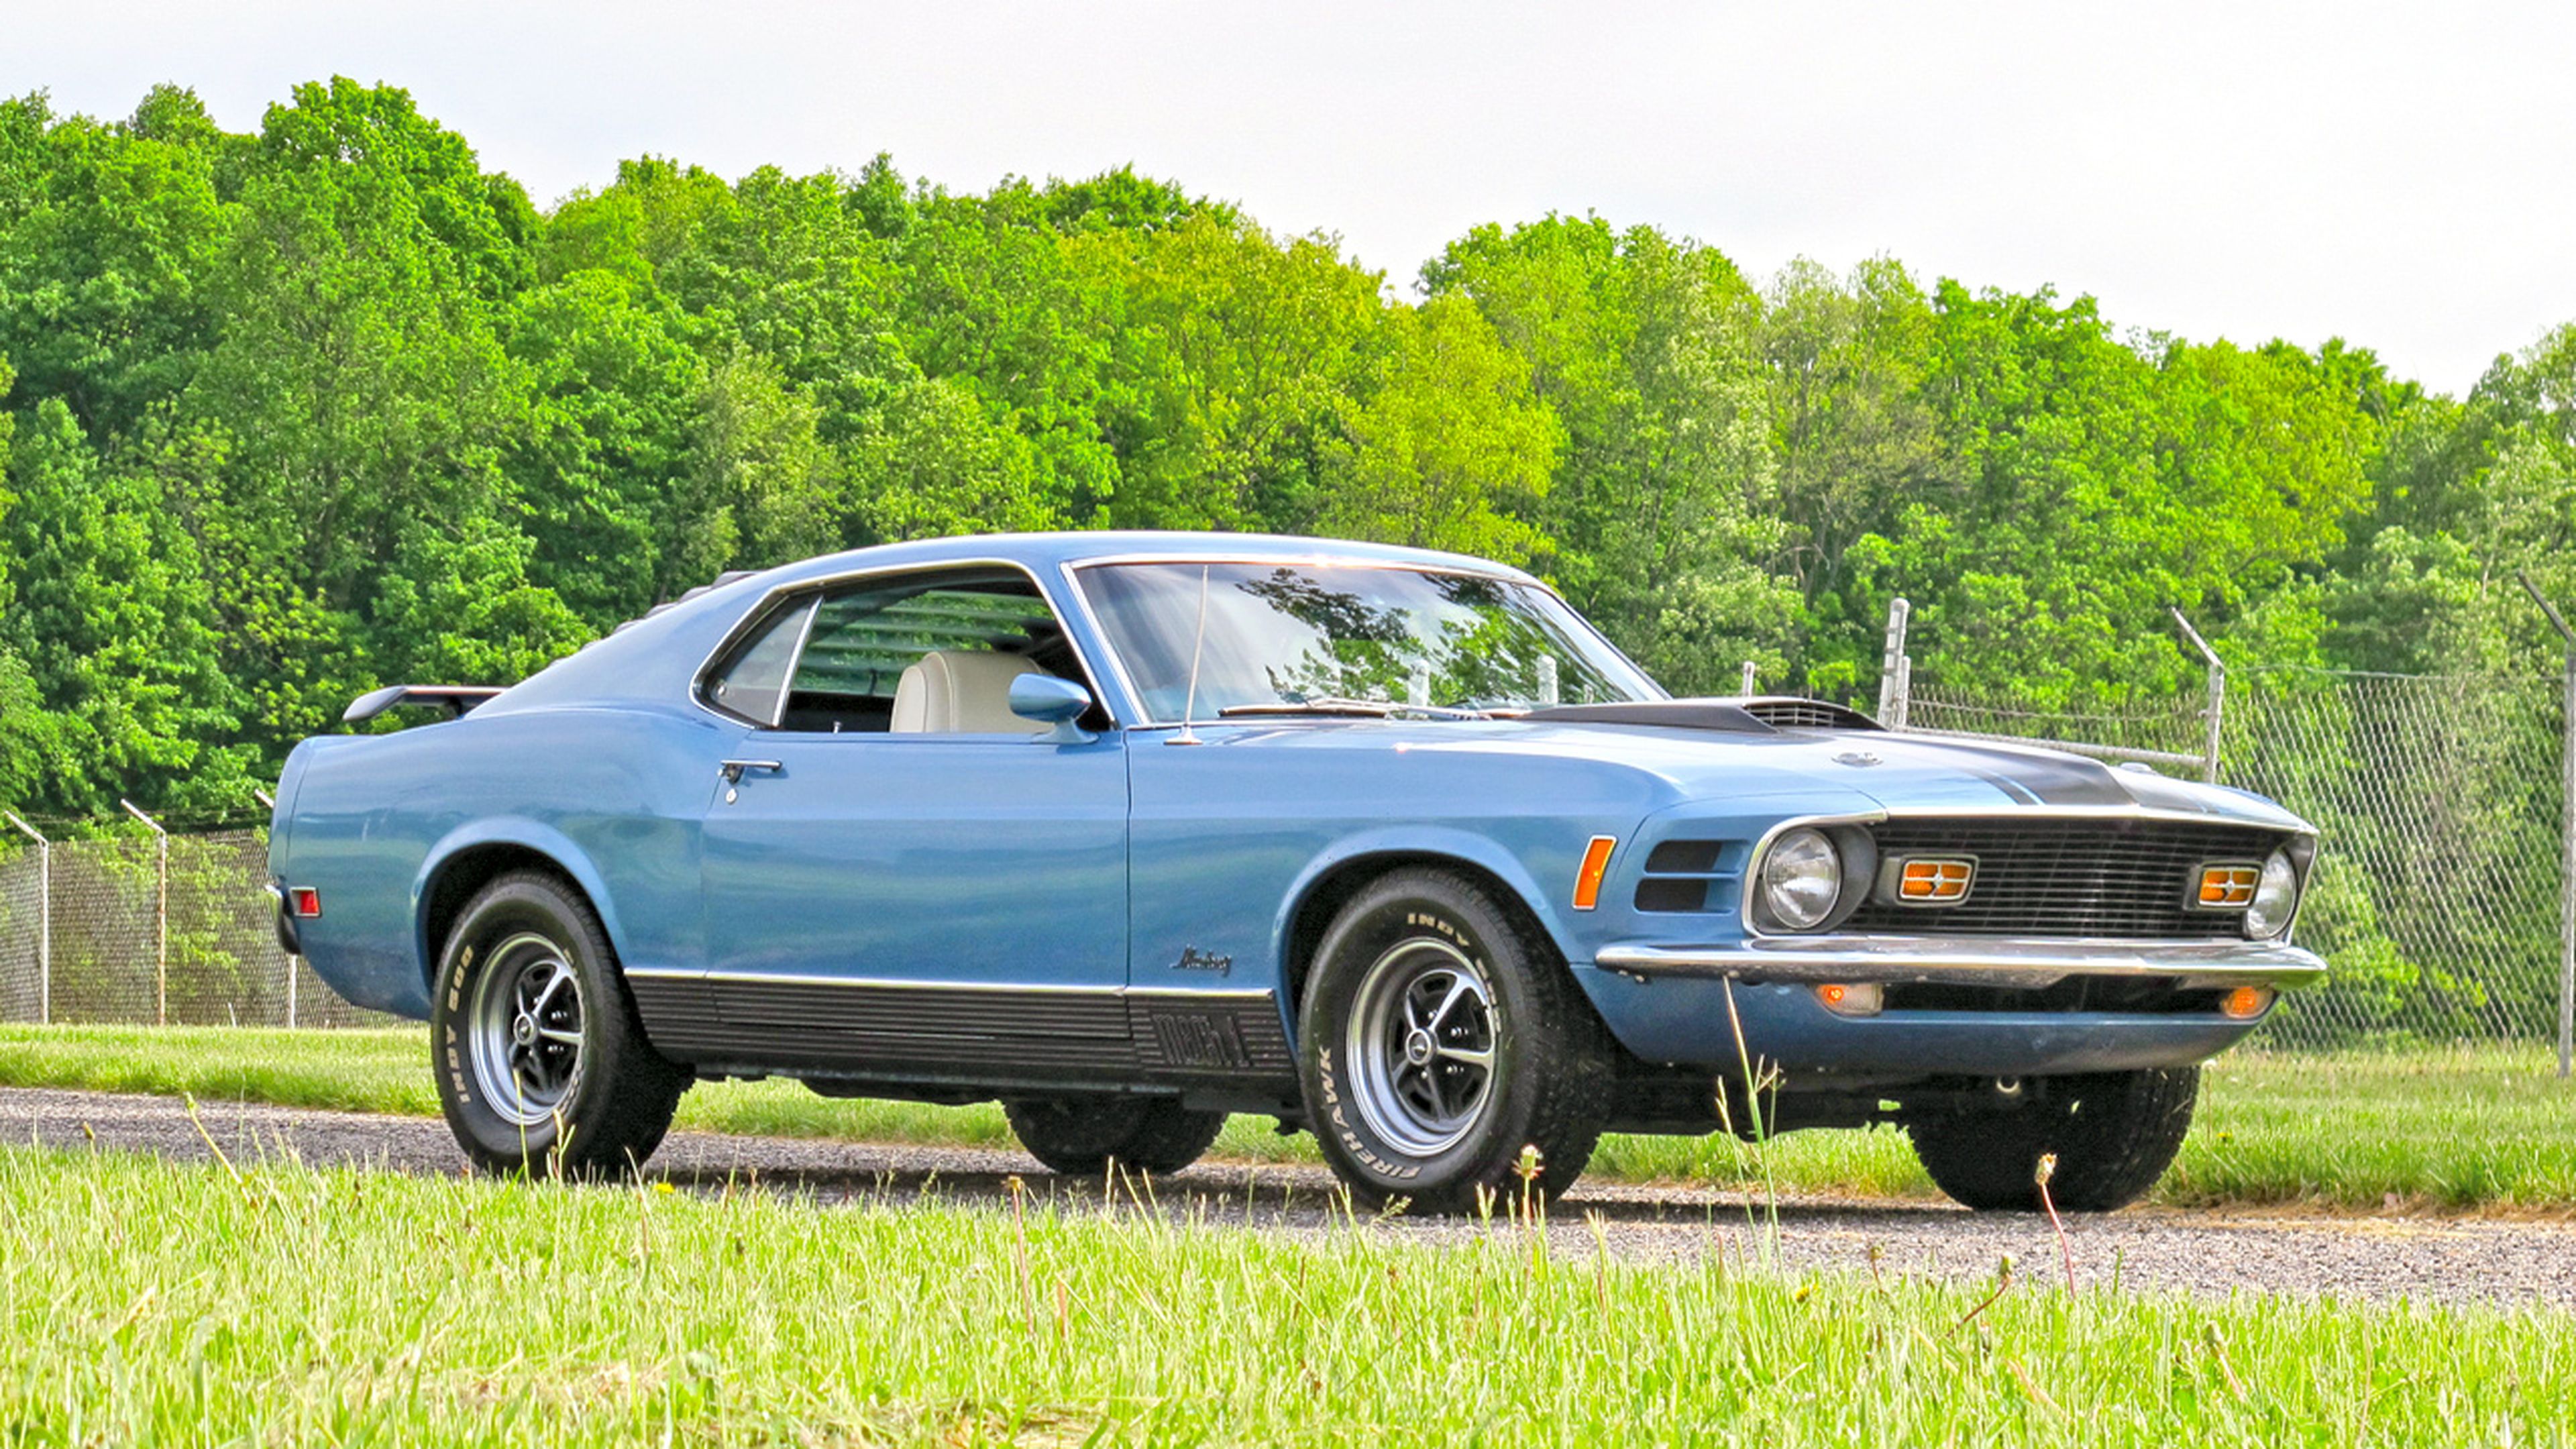 Ford Mustang Mach 1 RM Sotheby's